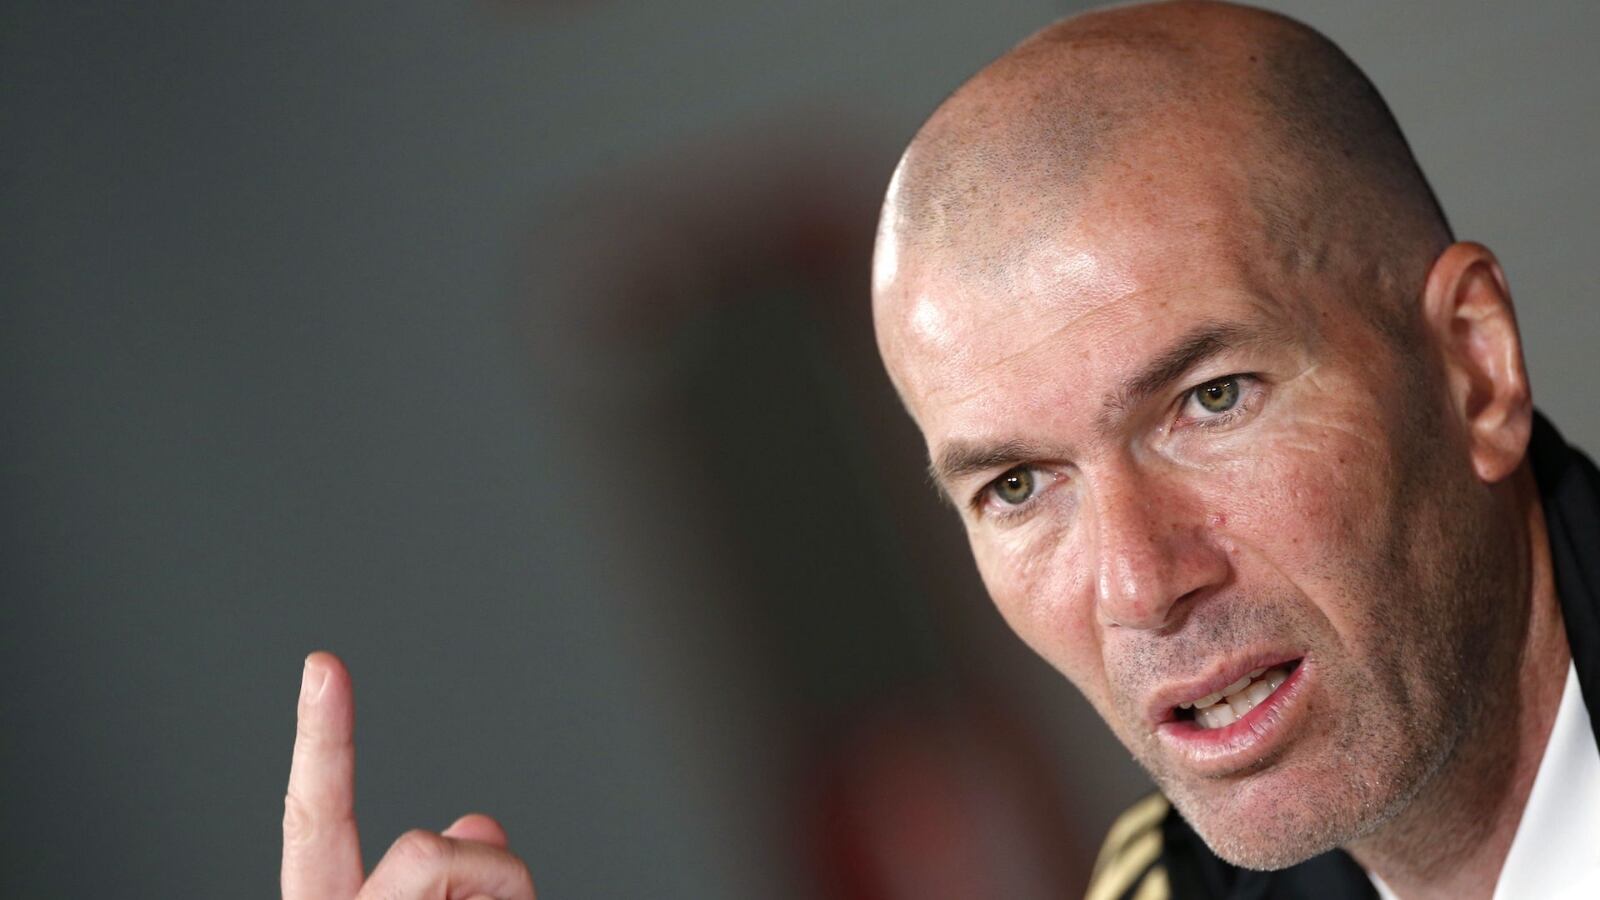 The Real Madrid star that Zinedine Zidane axed and cannot find a team